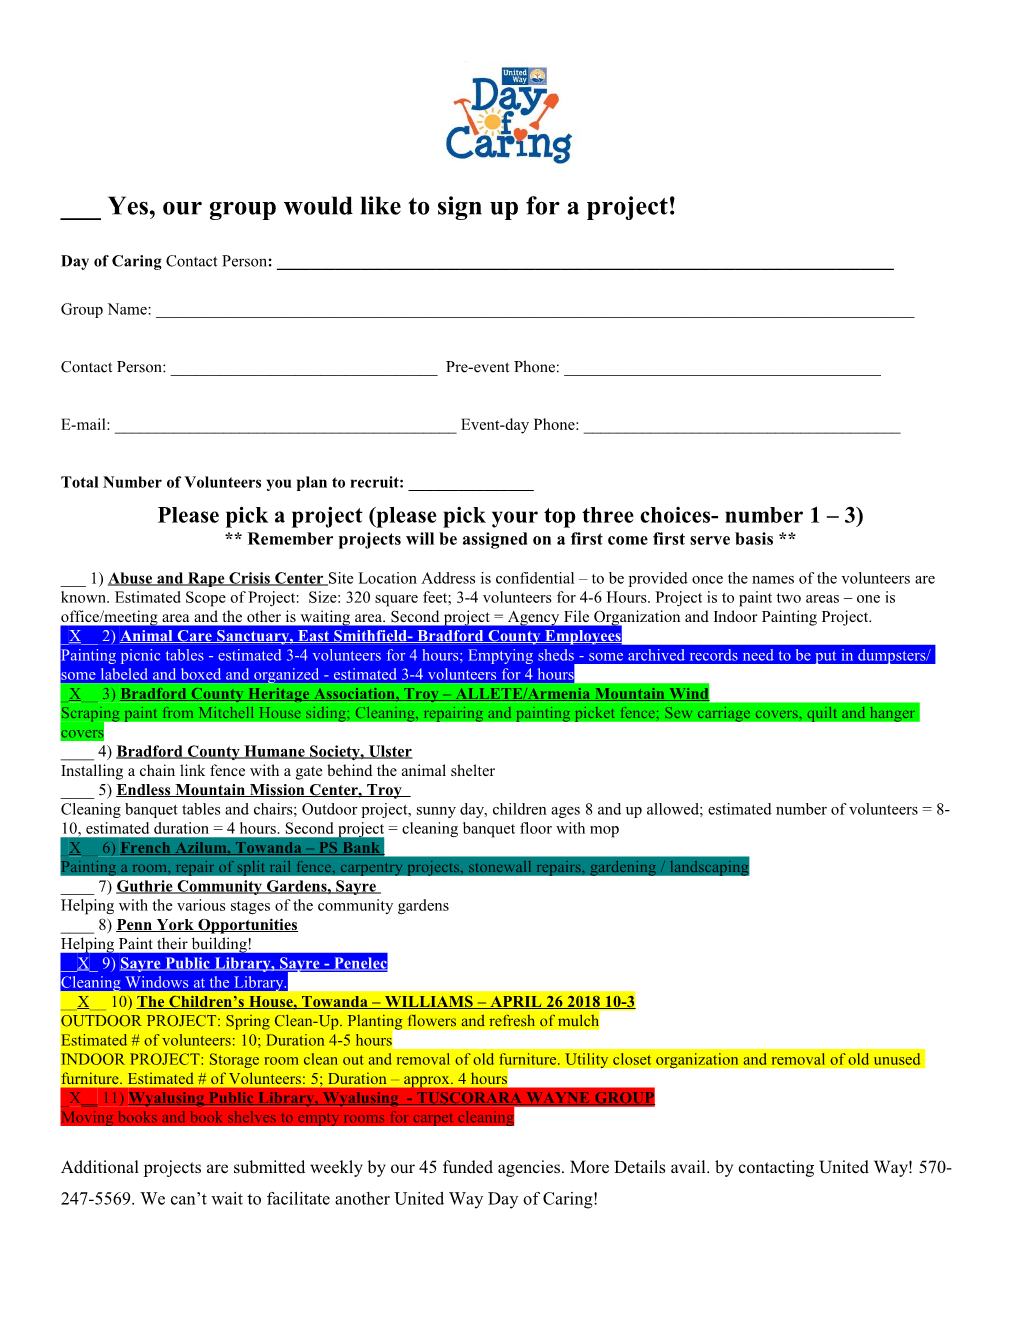 ___ Yes, Our Group Would Like to Sign up for a Project!